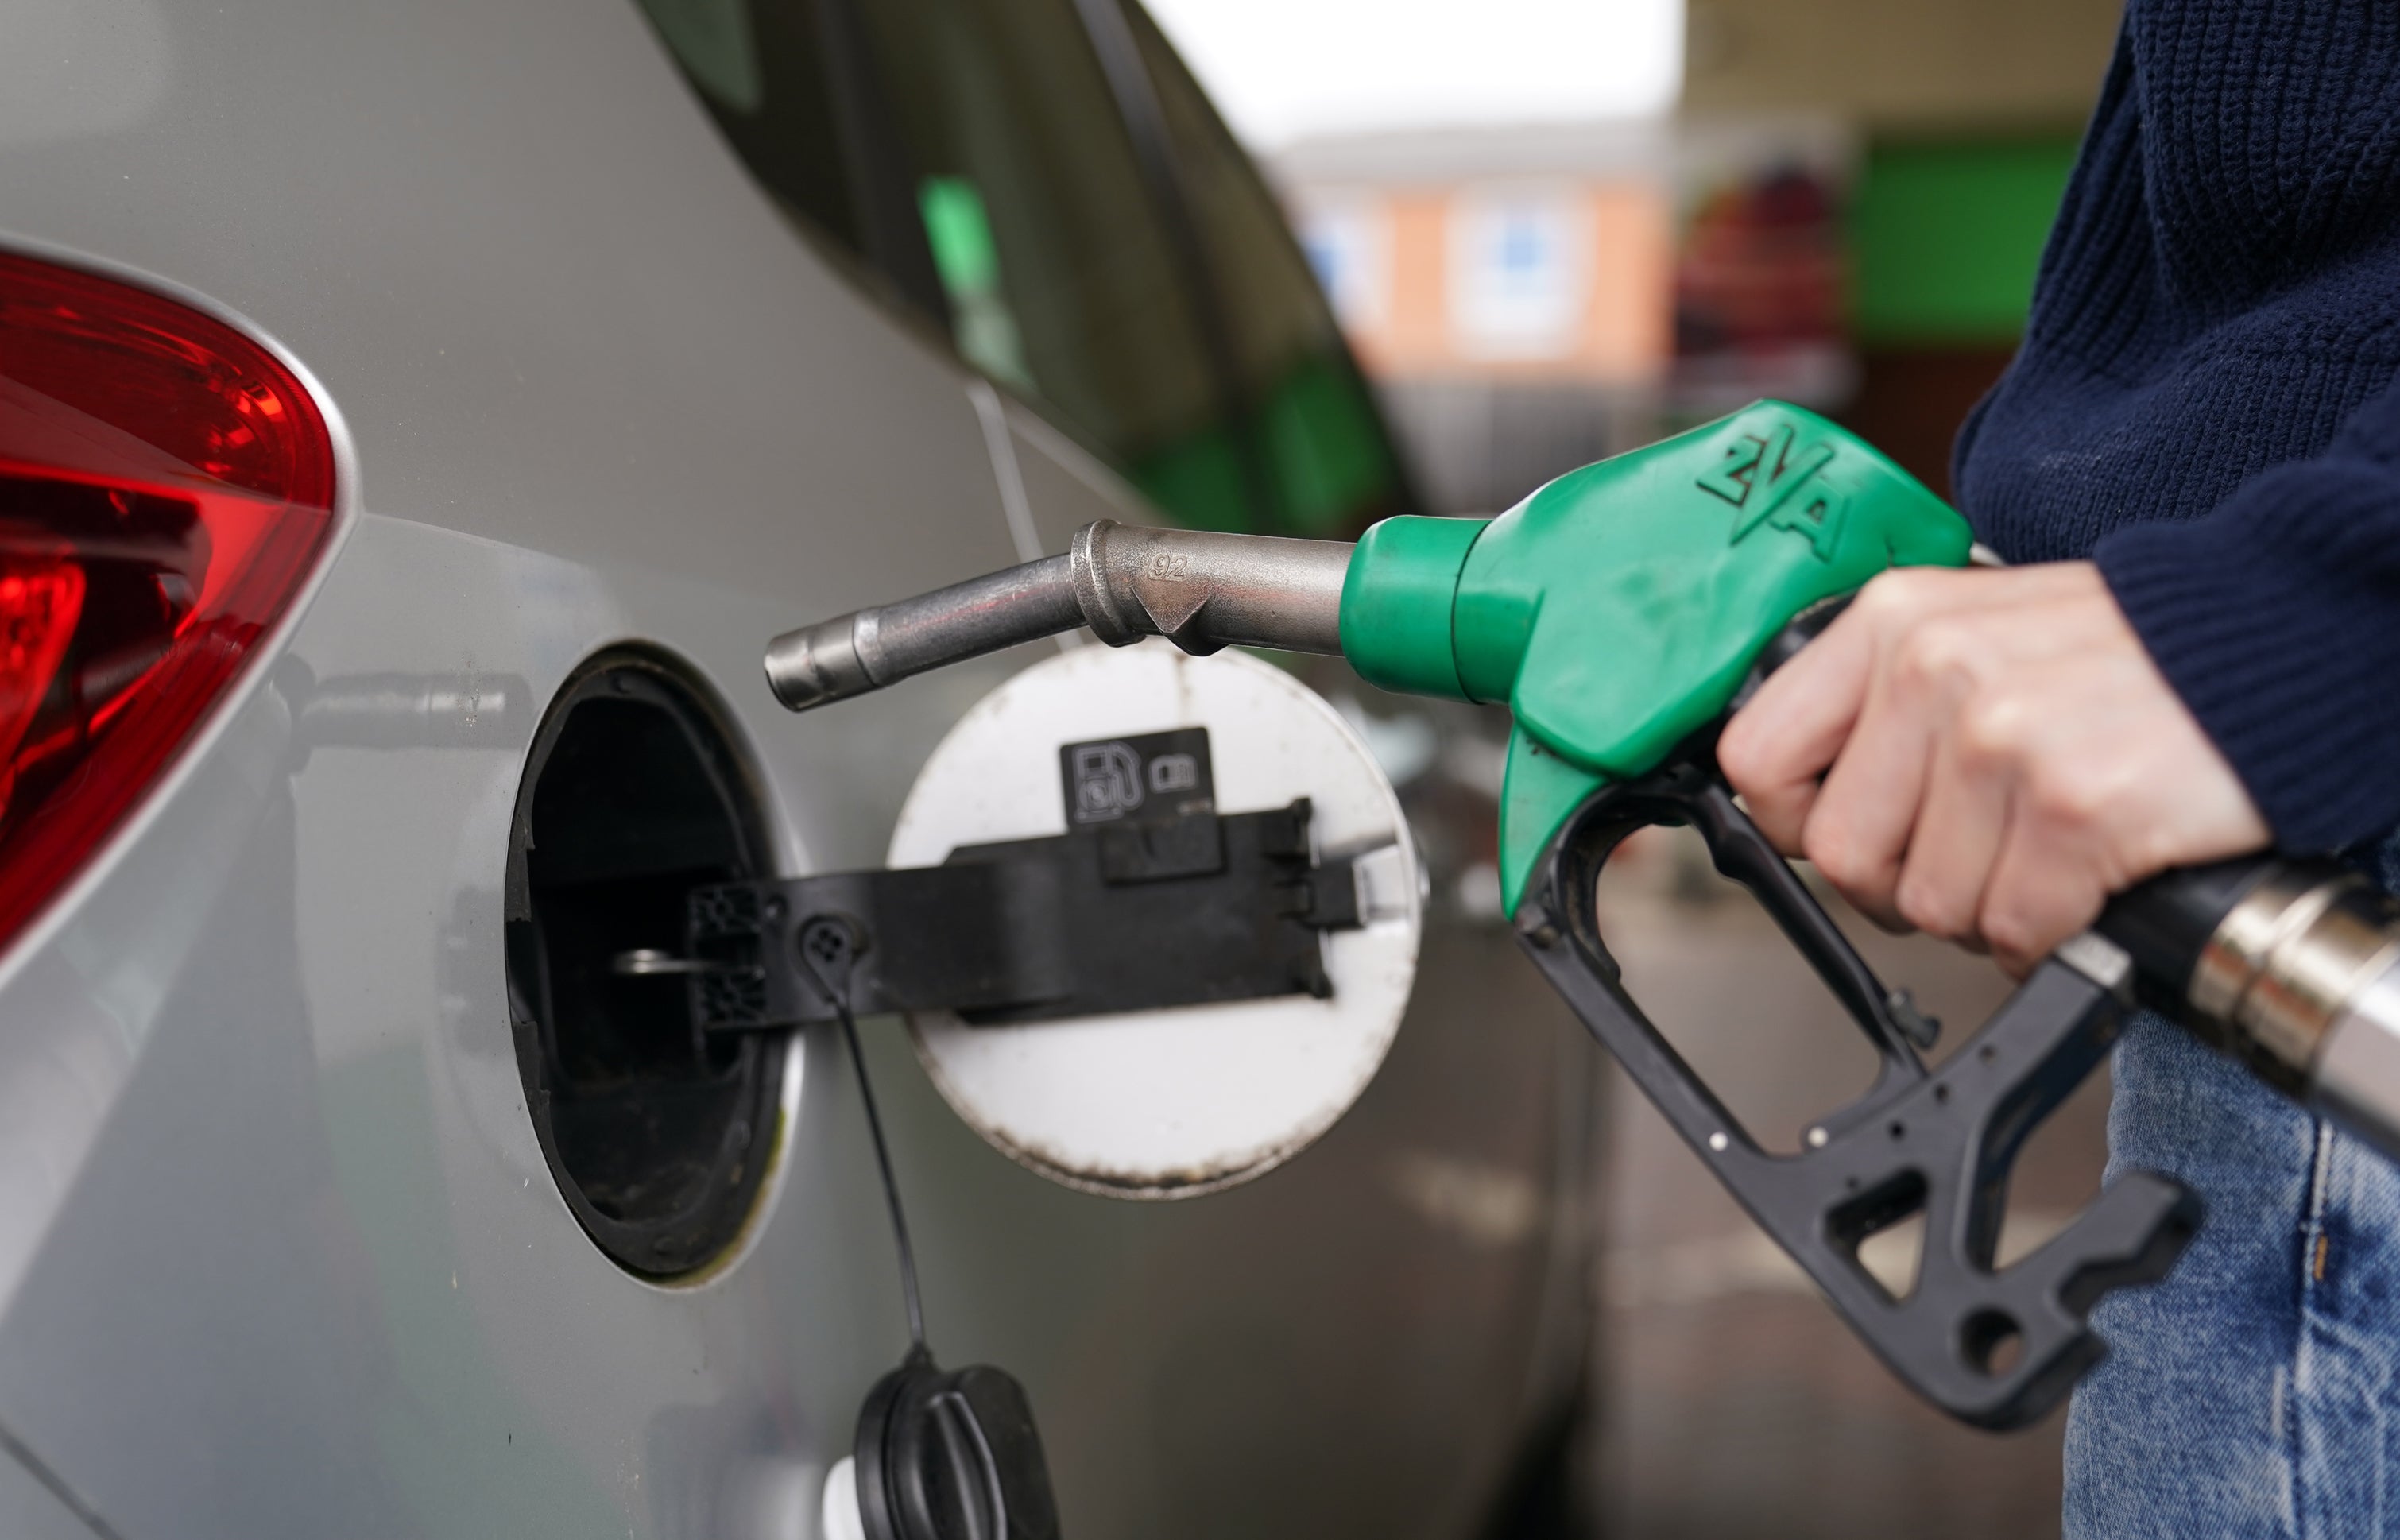 Fuel prices have been described as ‘pump fiction’ as they fail to reflect wholesale prices